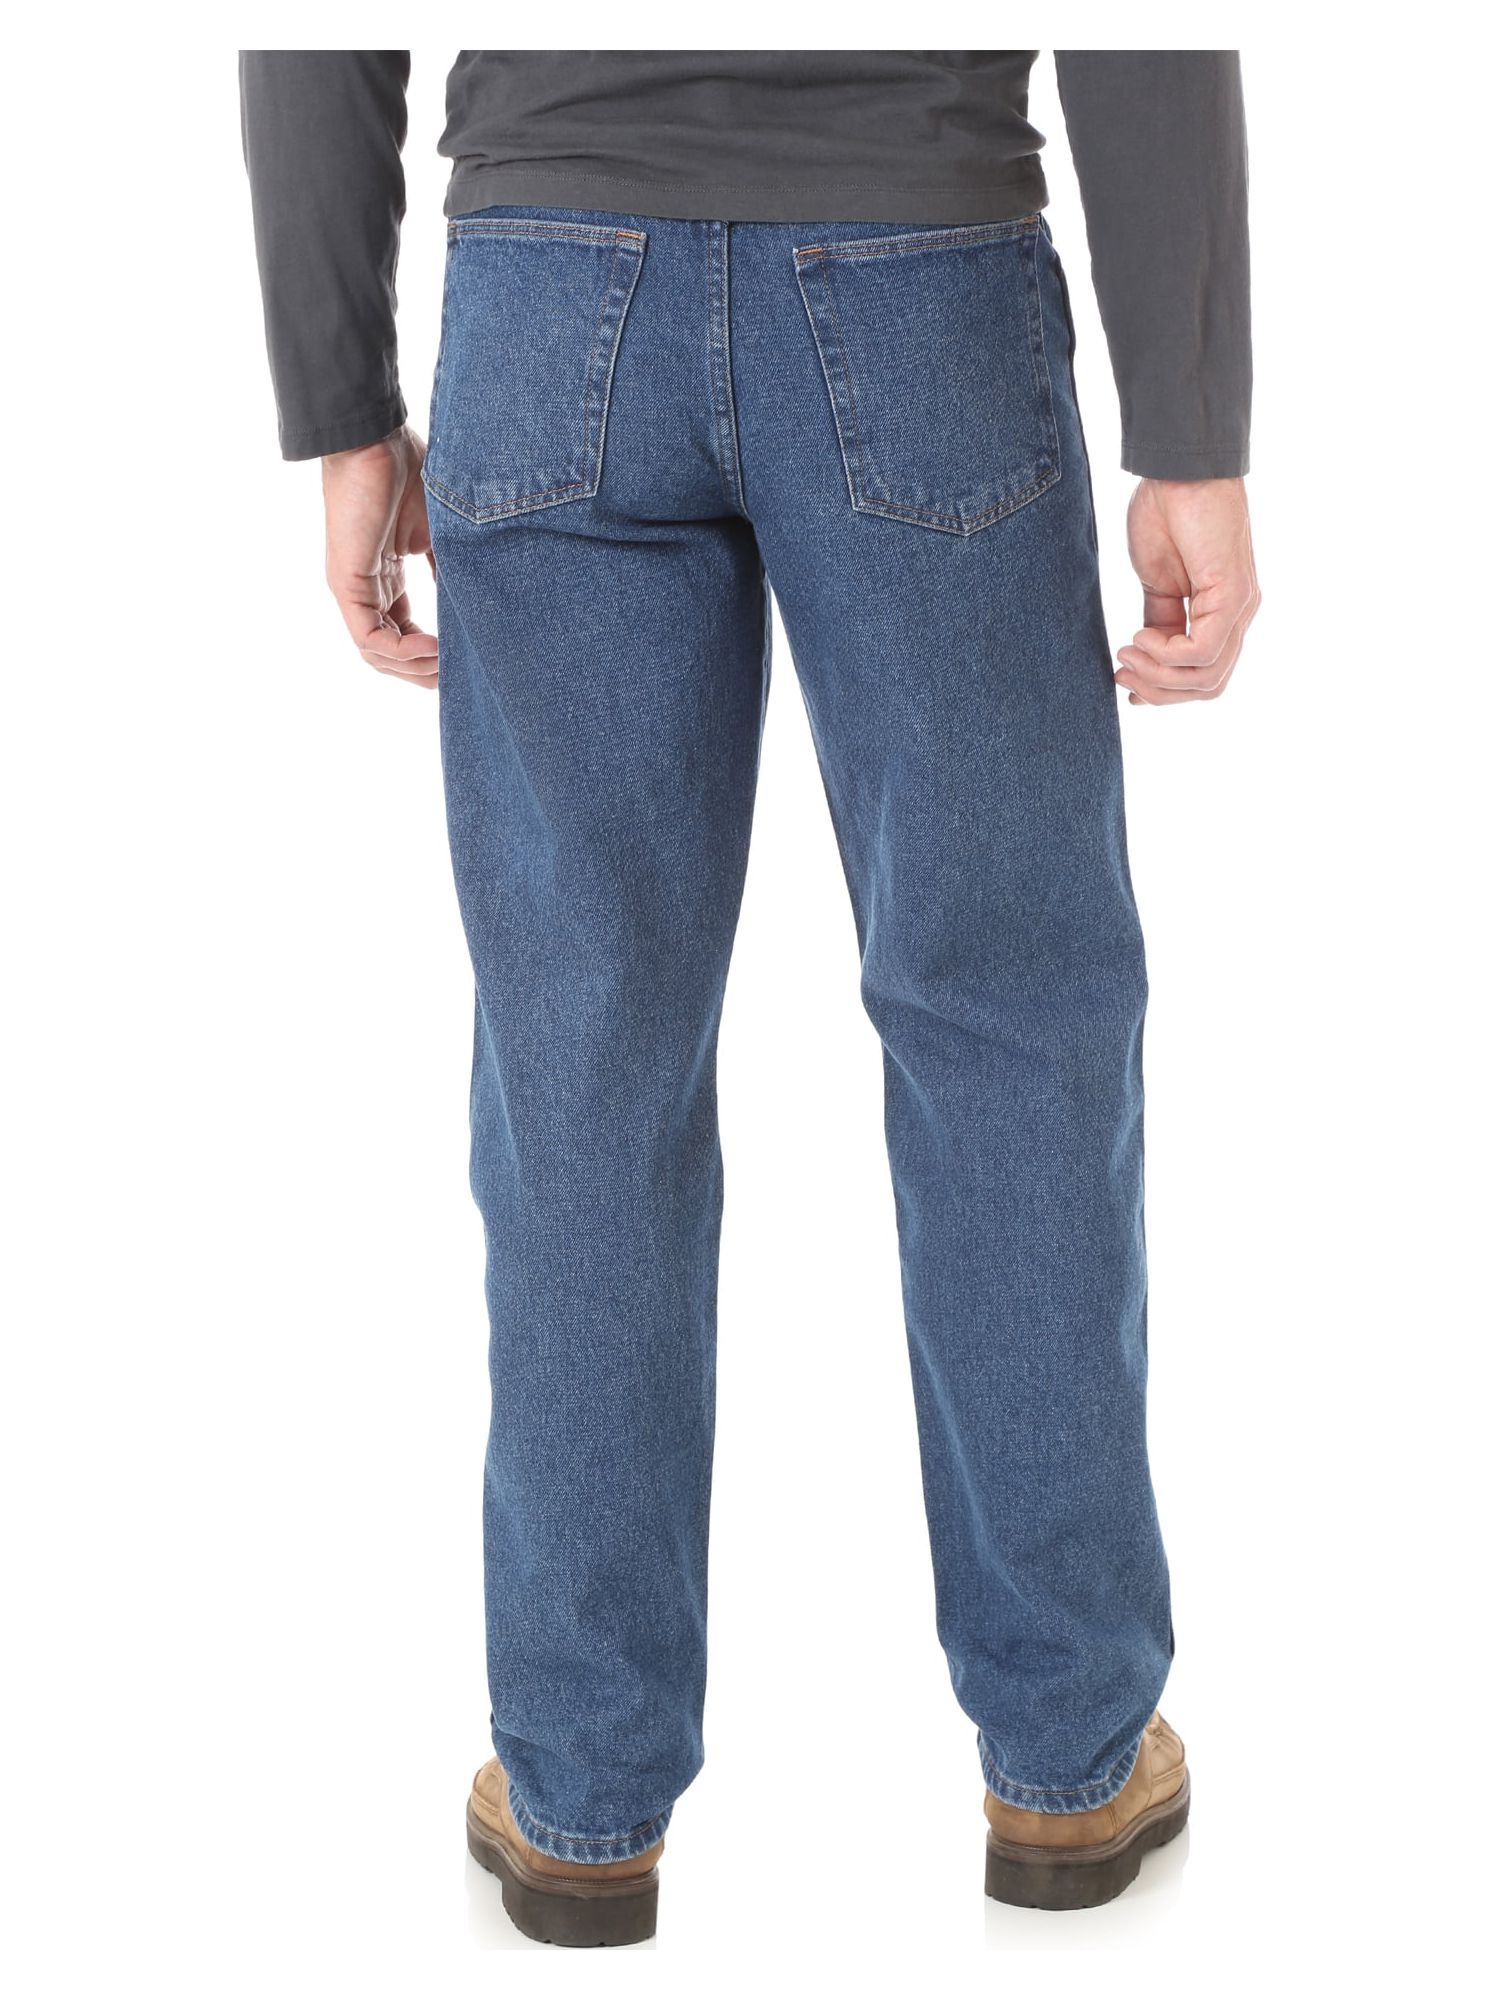 Wrangler Rustler Men's and Big Men's Relaxed Fit Jeans - image 3 of 5